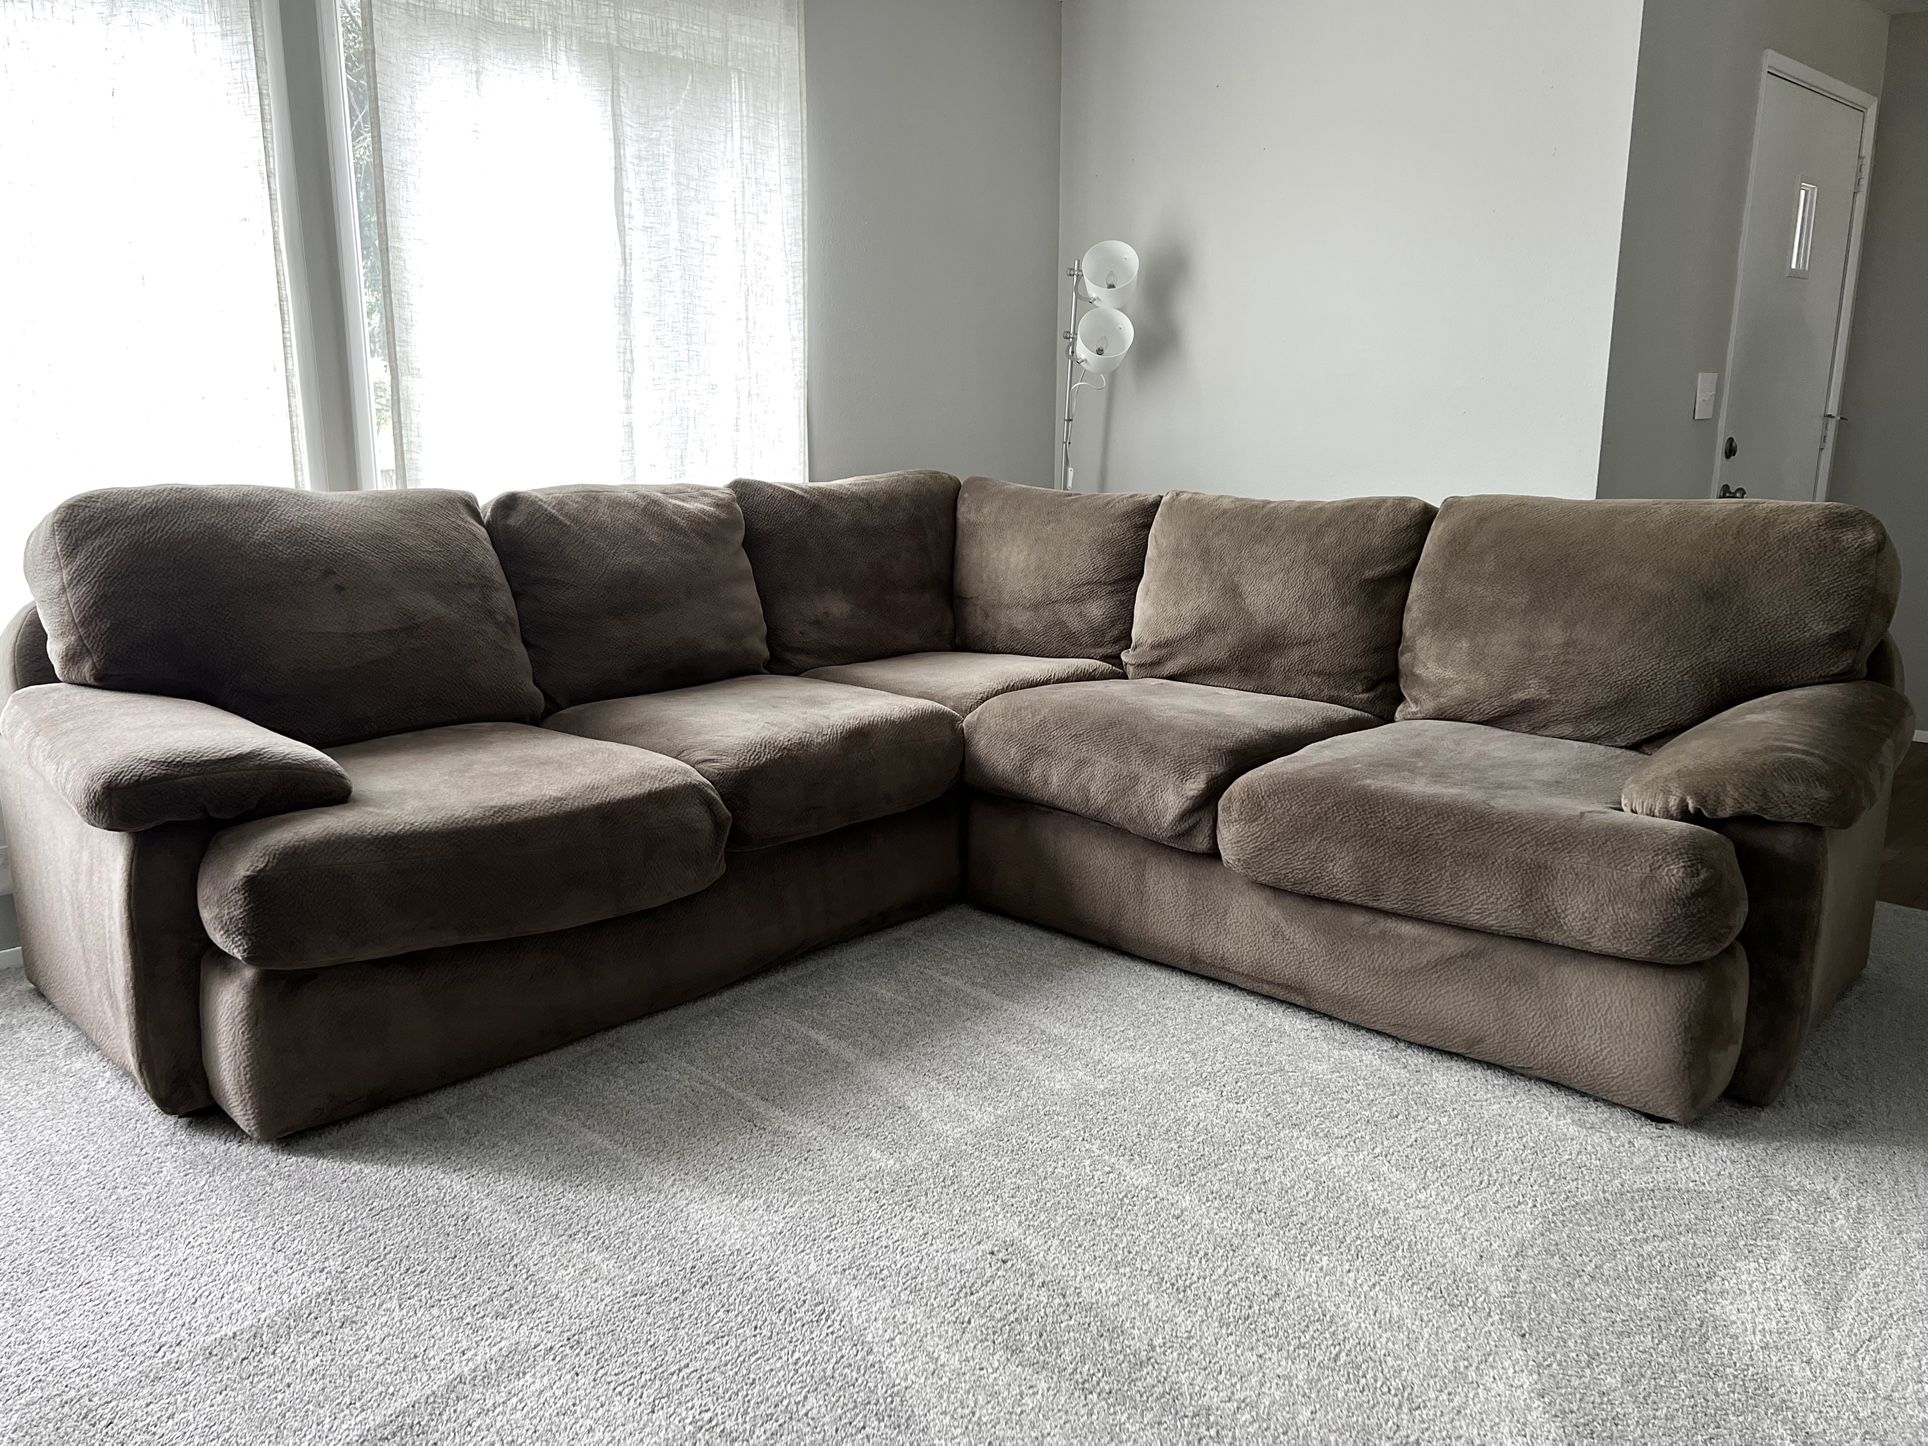 Large Brown Sectional Couch - FREE DELIVERY